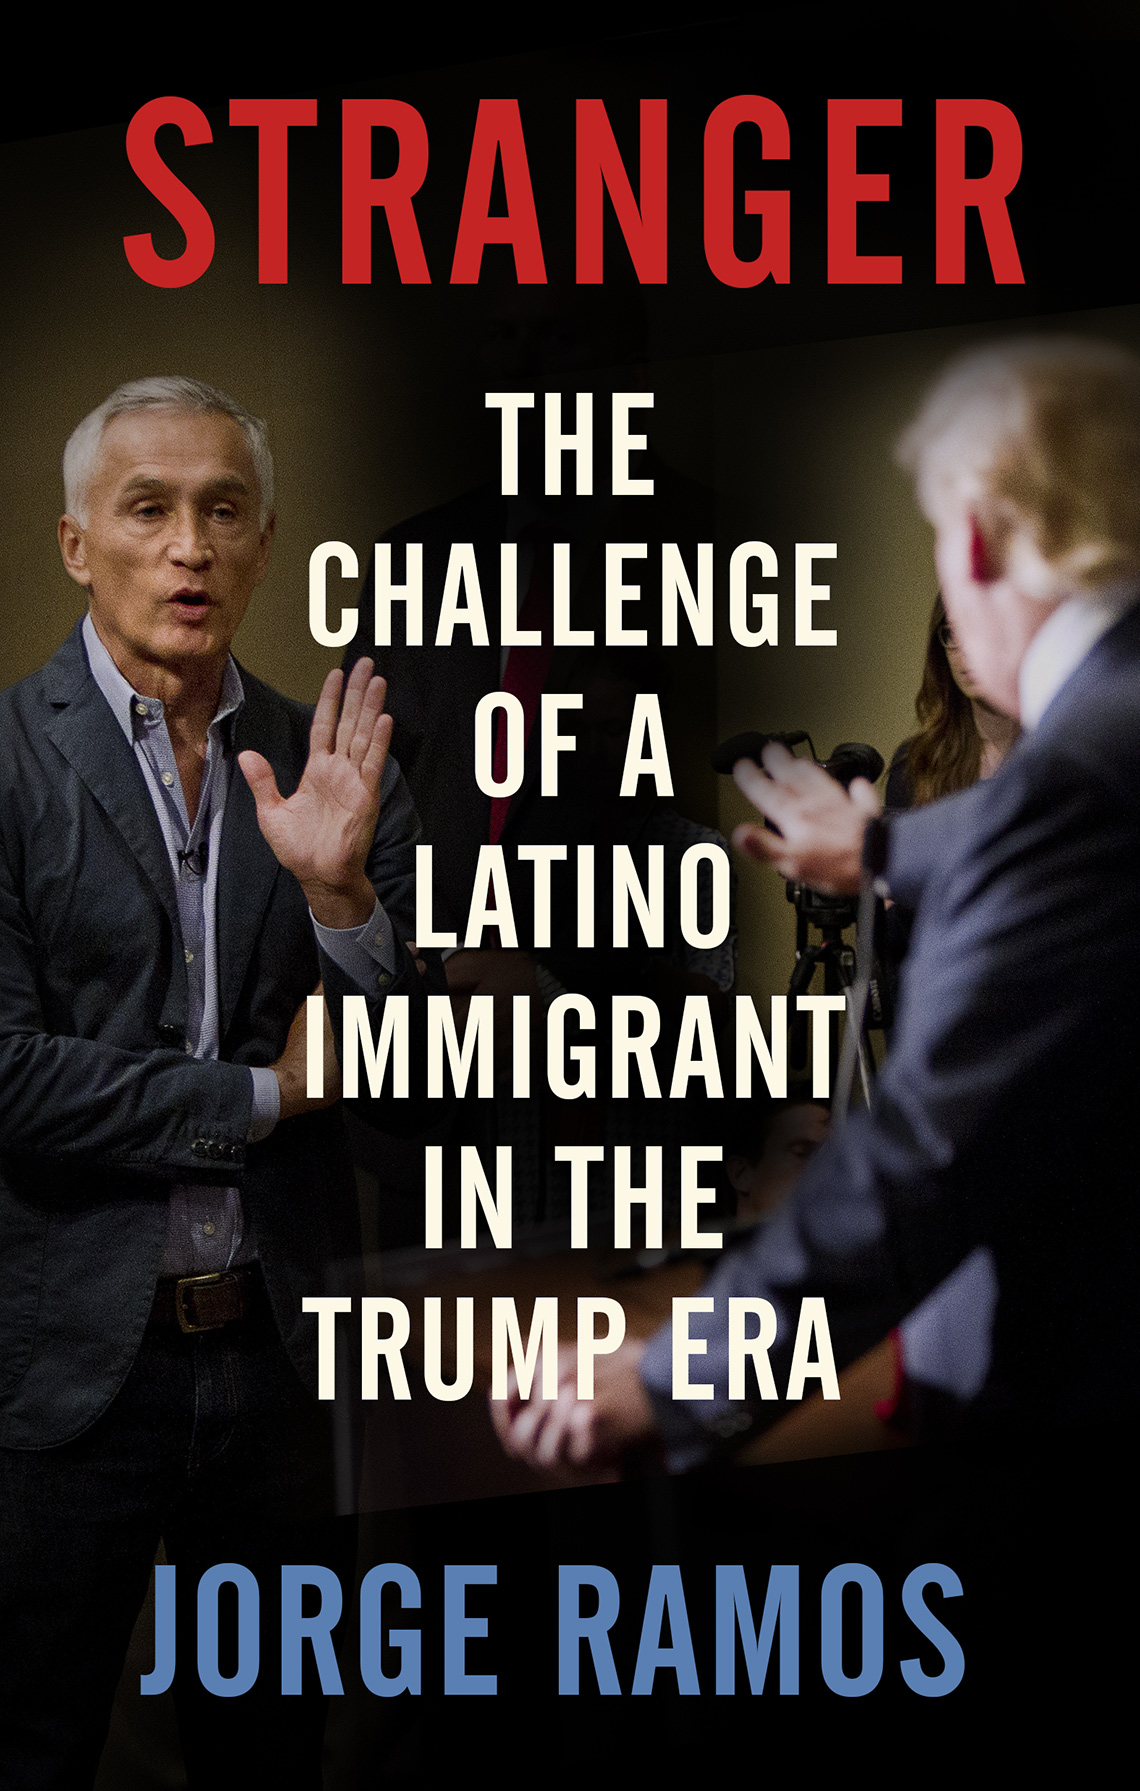 Jorge Ramos book cover in English